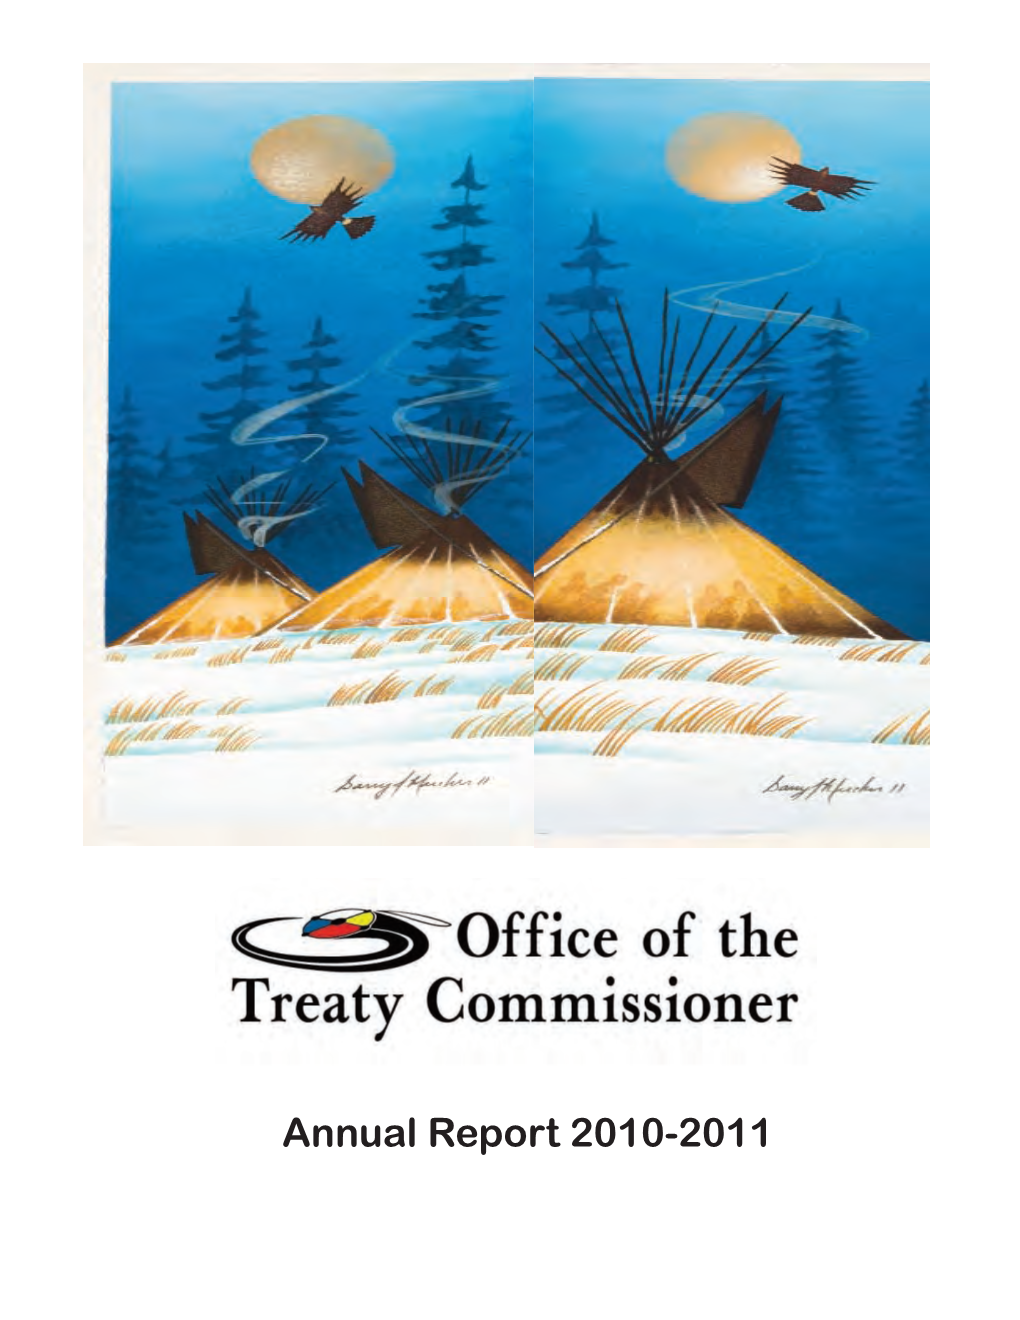 Annual Report 2010-2011 Office of the Treaty Commissioner 2010-2011 Annual Report